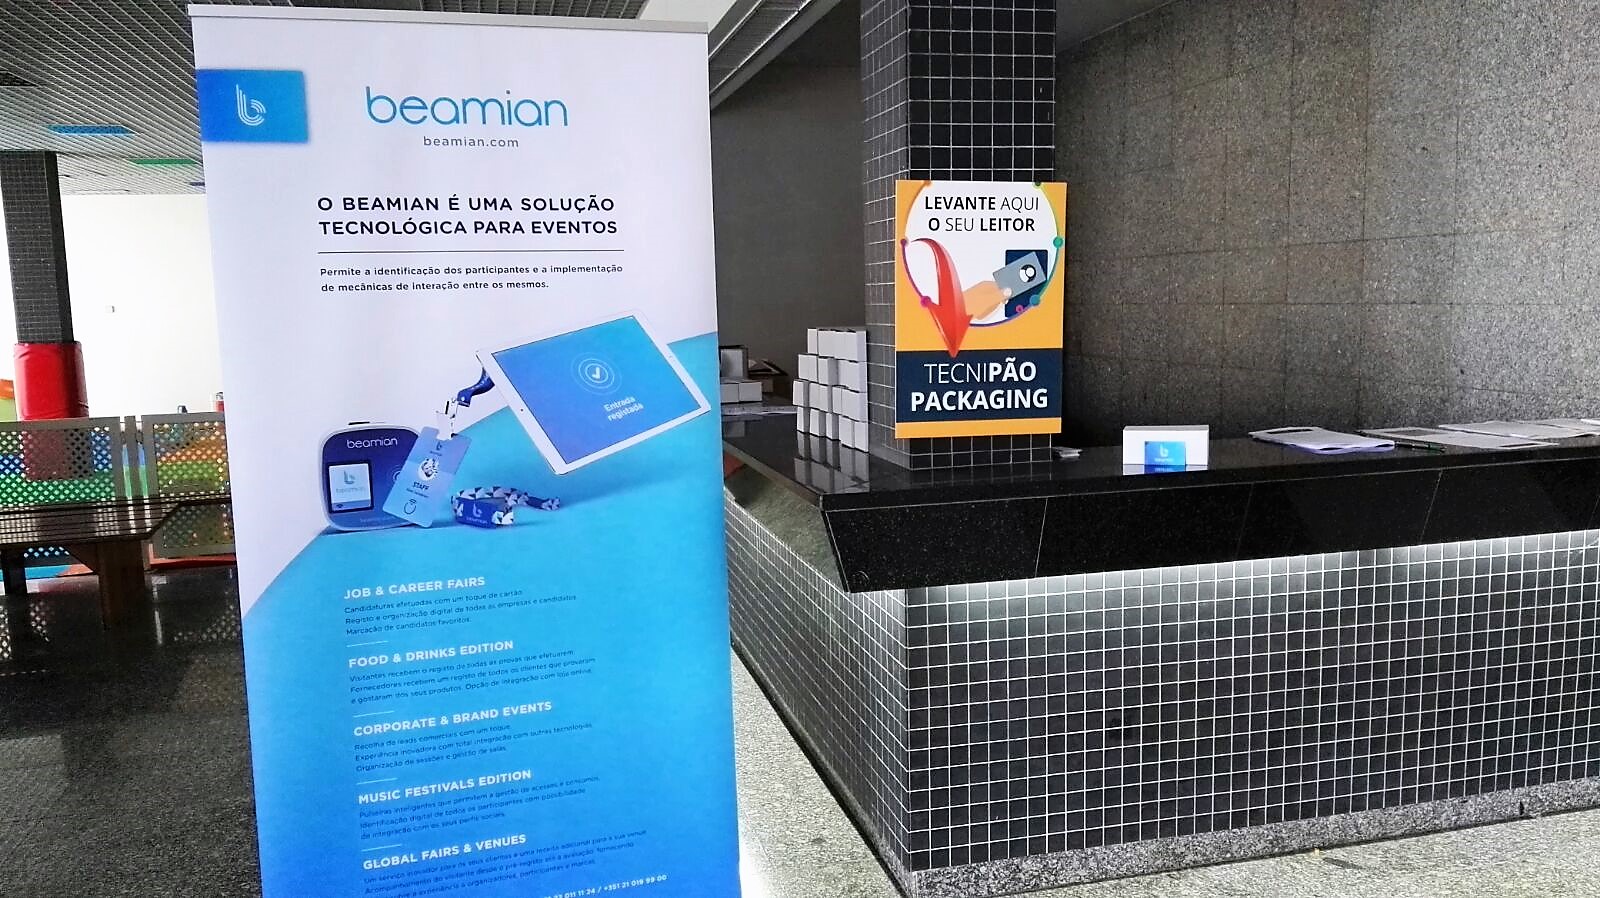 Packaging 2018 – beamian at Tecnipão